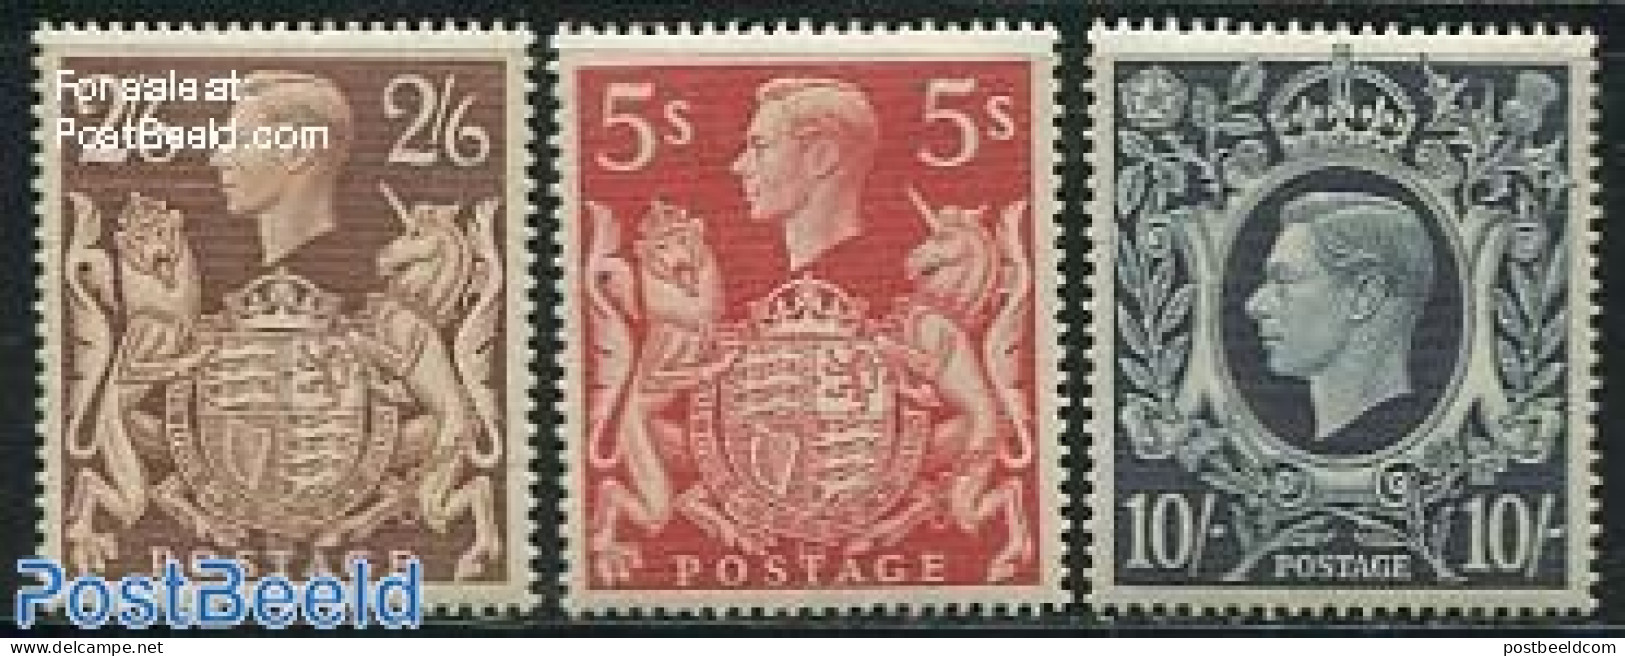 Great Britain 1939 Definitives 3v, Mint NH - Unused Stamps